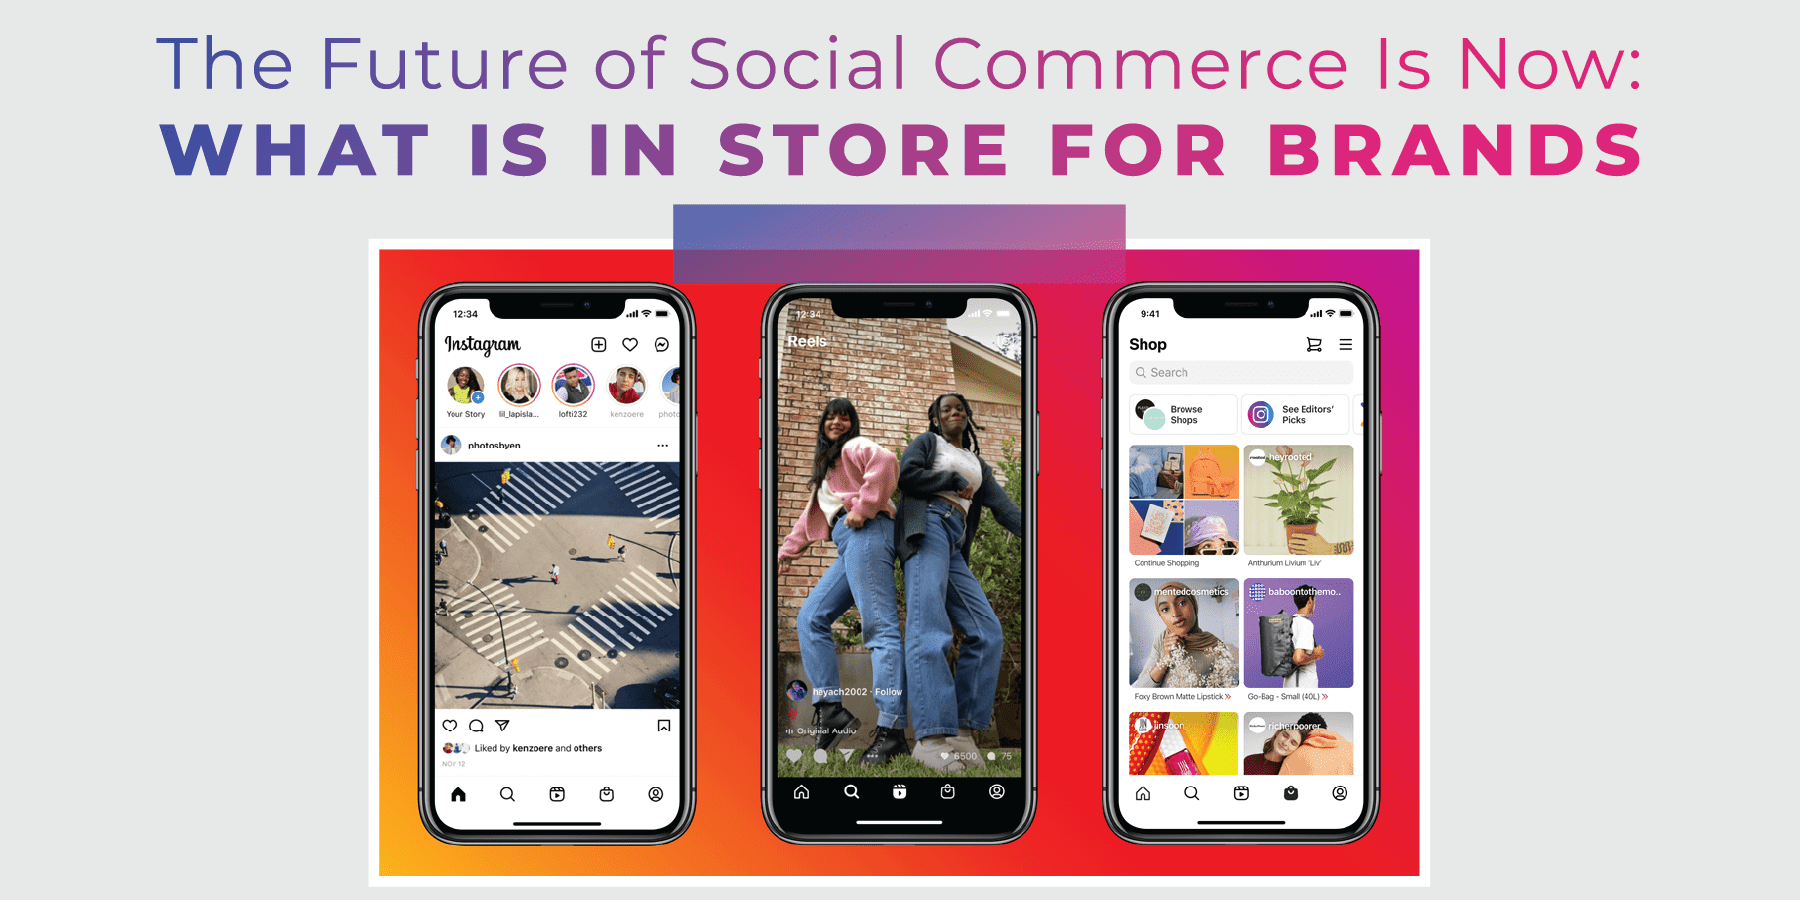 The Future of Social Commerce Is Now: What Is In Store For Brands